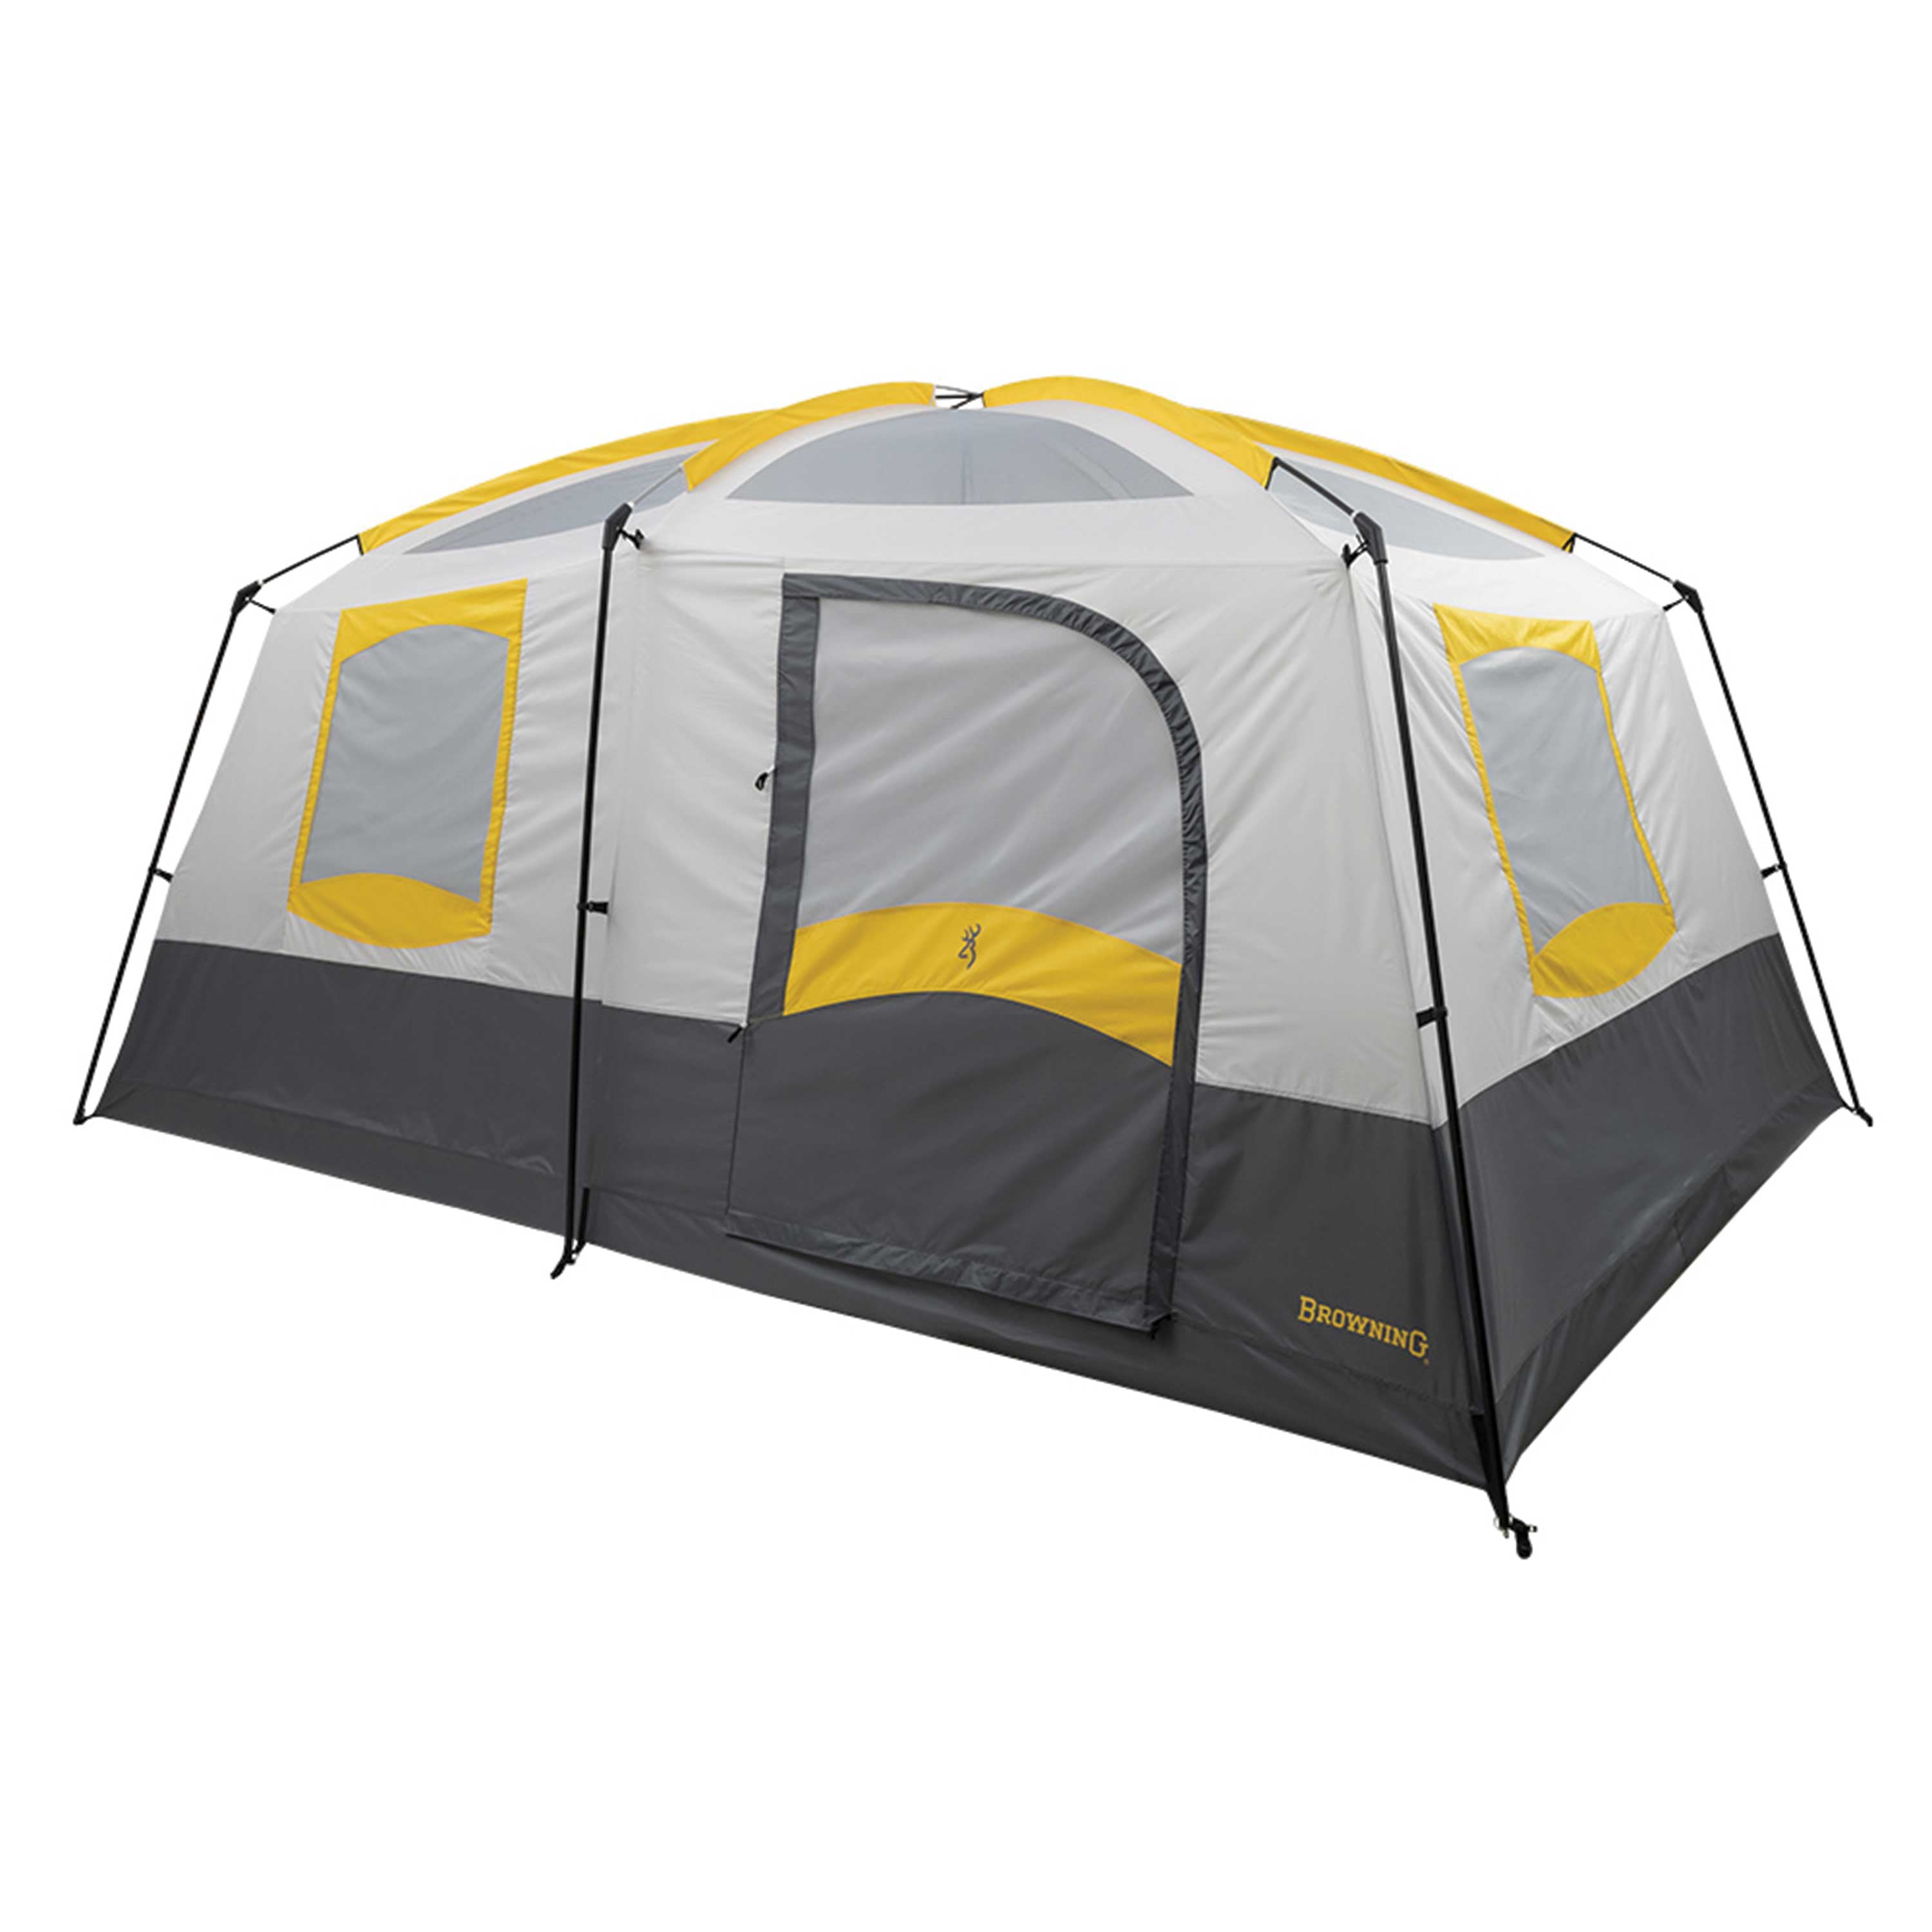 Browning Big Horn Two Room Tent - 2022 Color